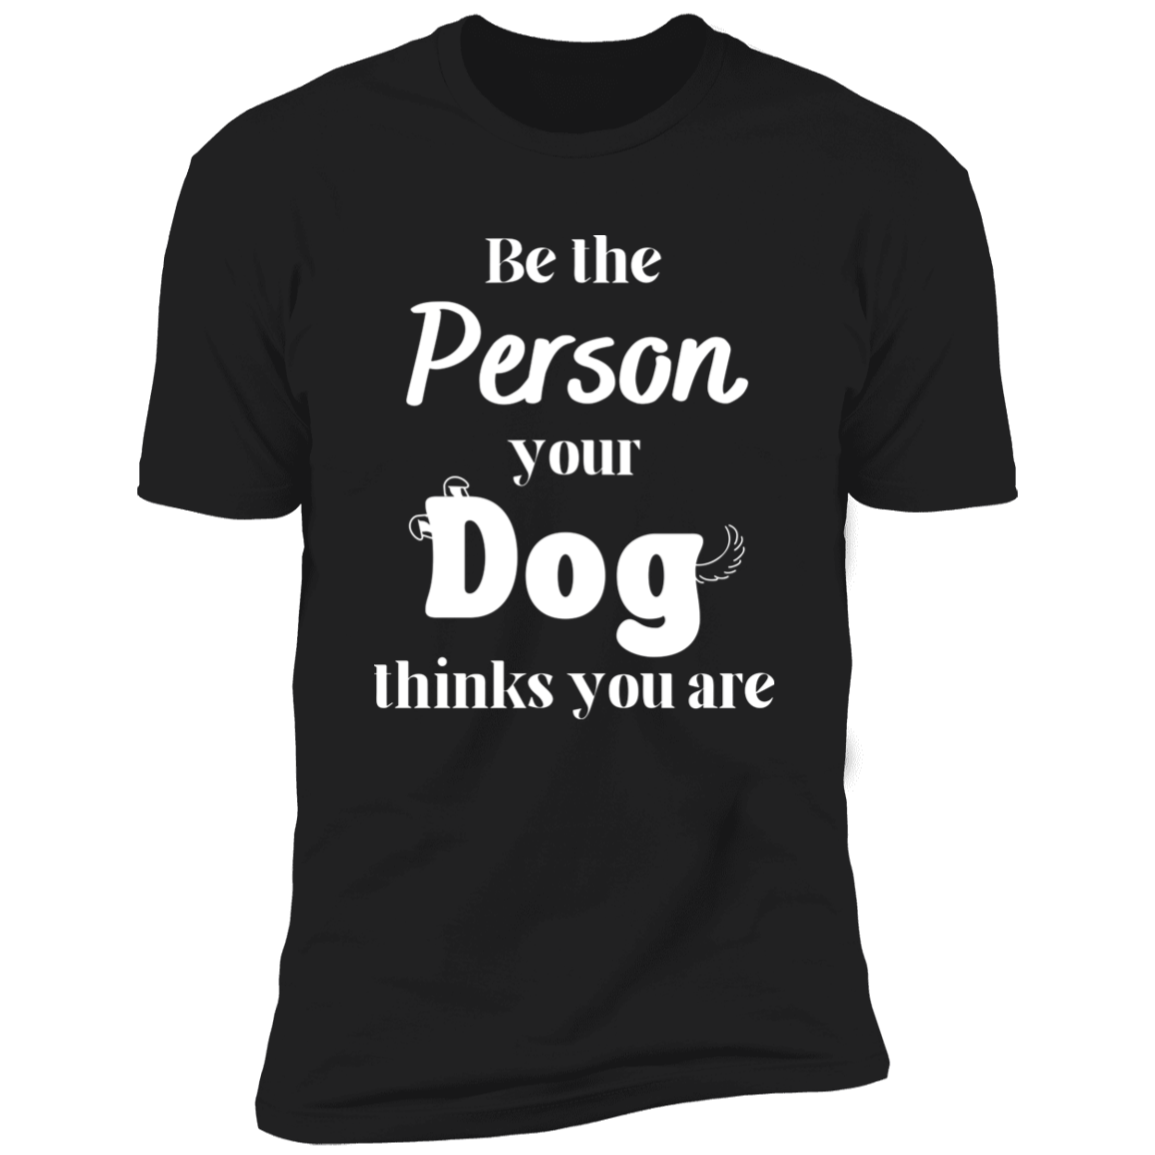 Be the Person Your Dog Thinks You Are T-shirt, Dog Shirt for humans, in black